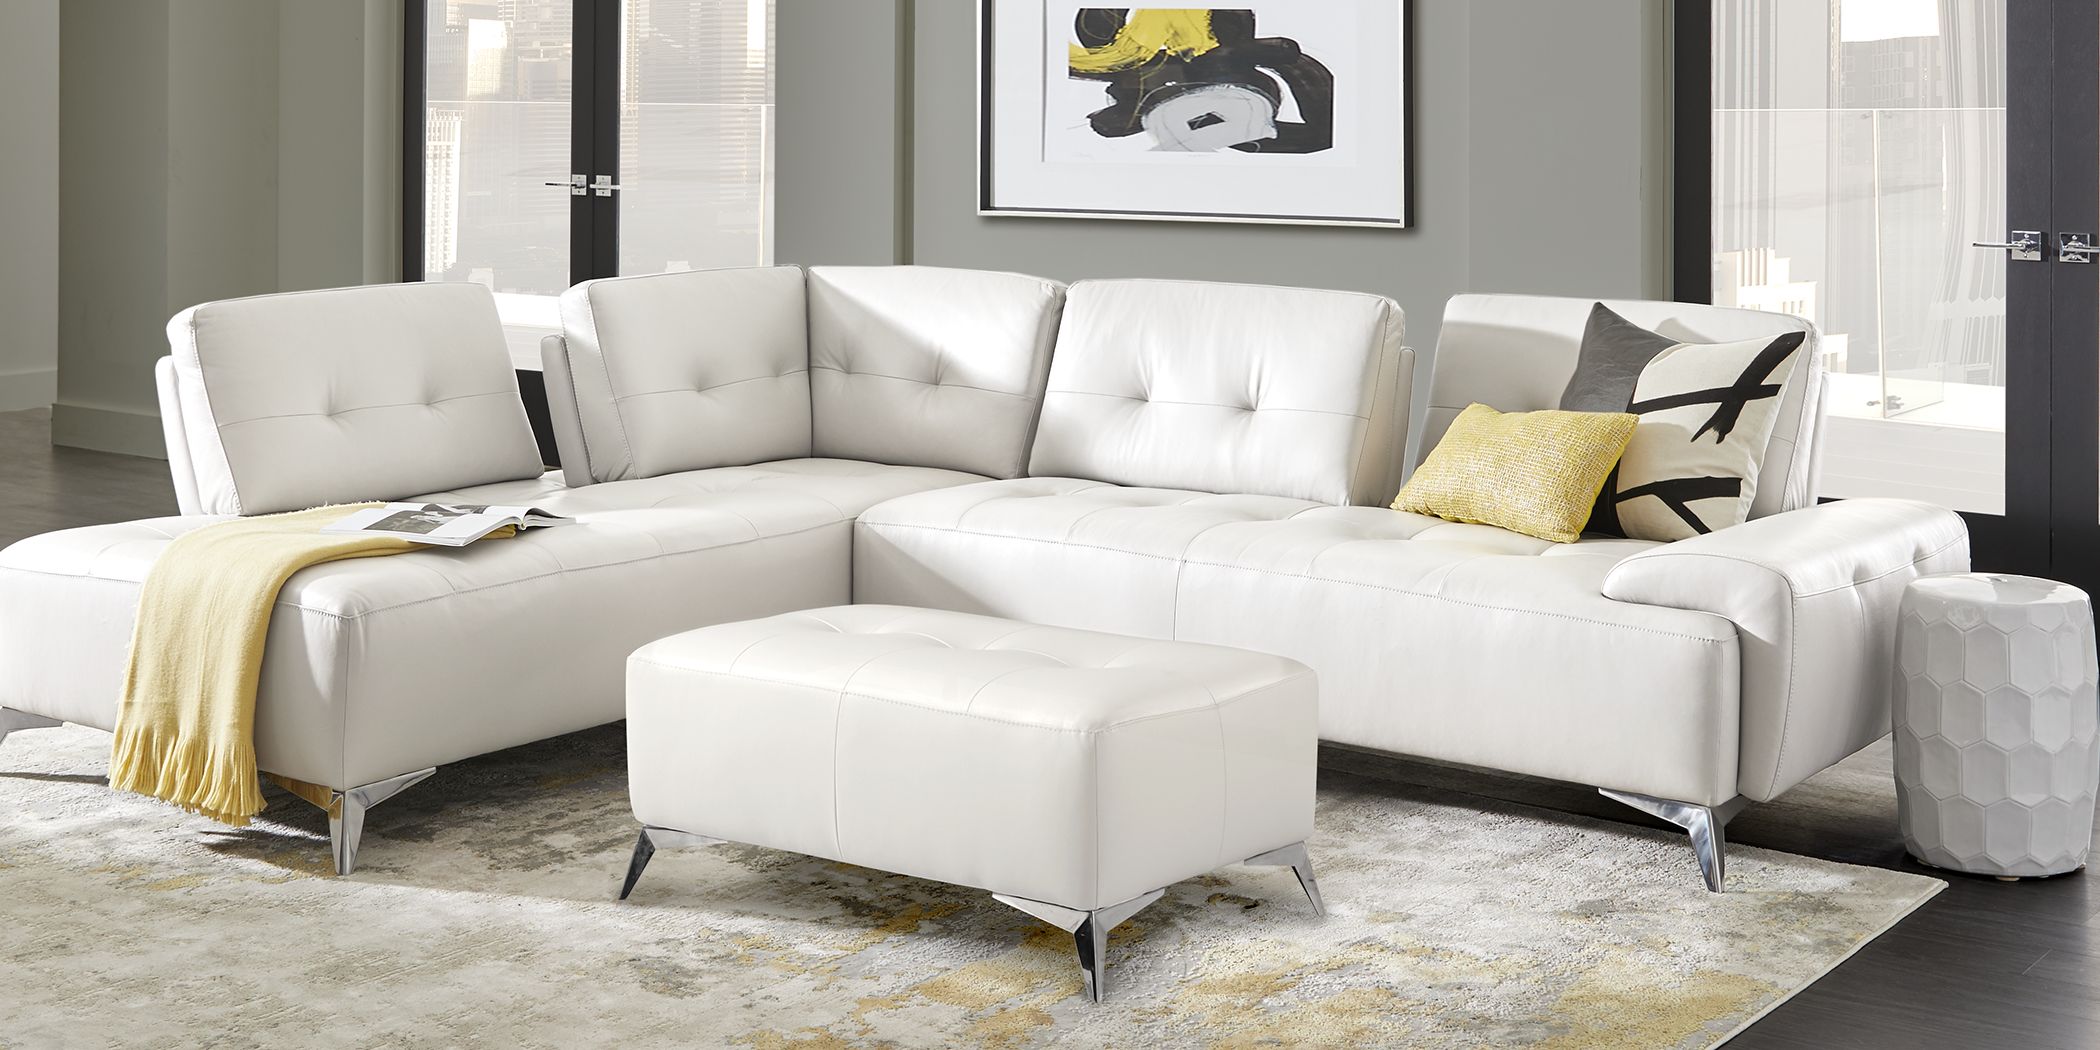 White Leather Living Room Sets White Leather Furniture